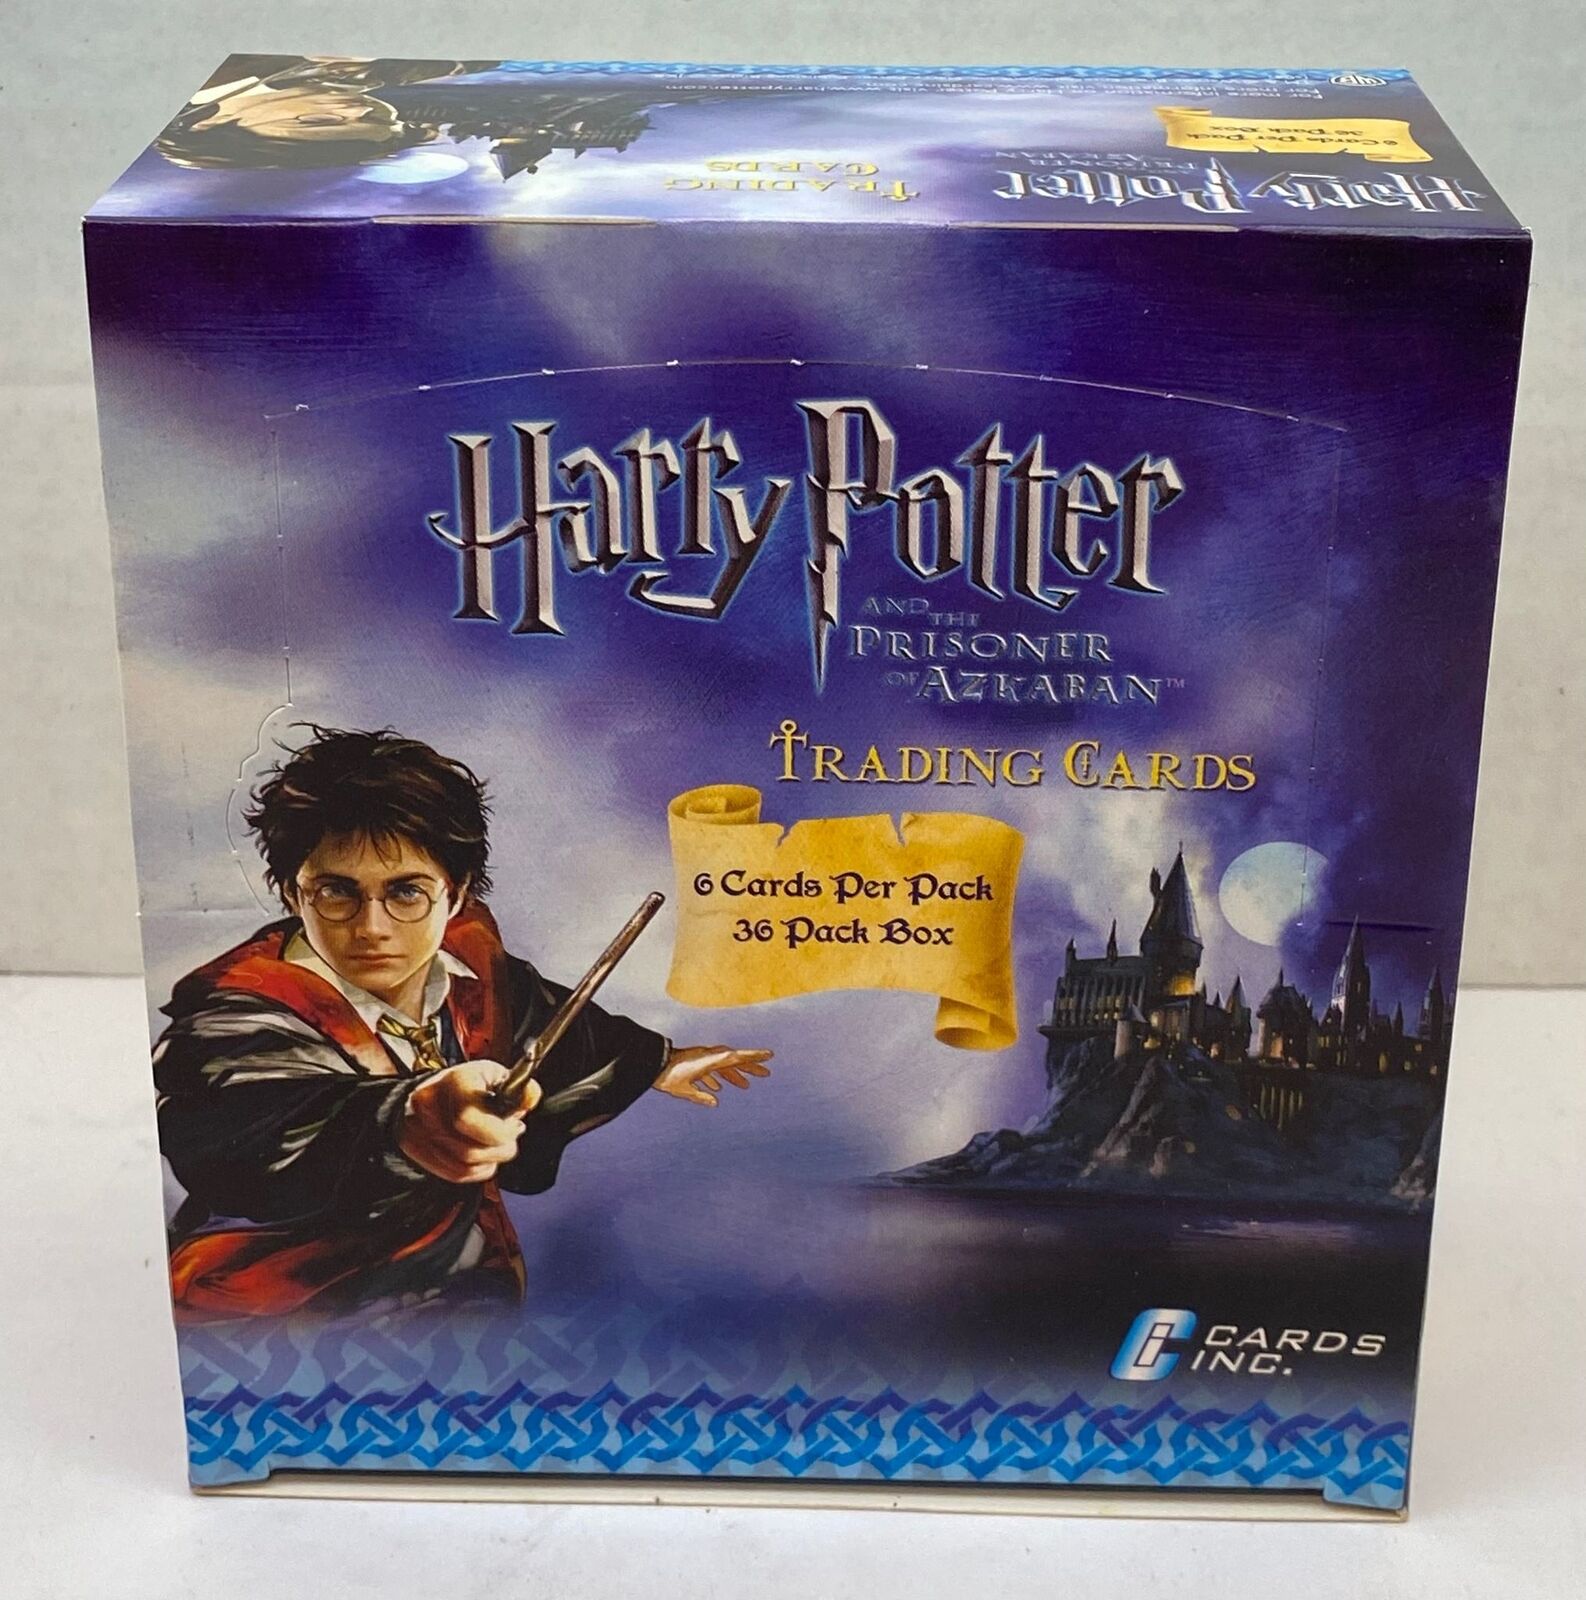 Harry Potter and the Prisoner of Azkaban Trading Card Box Cards Inc. 2004